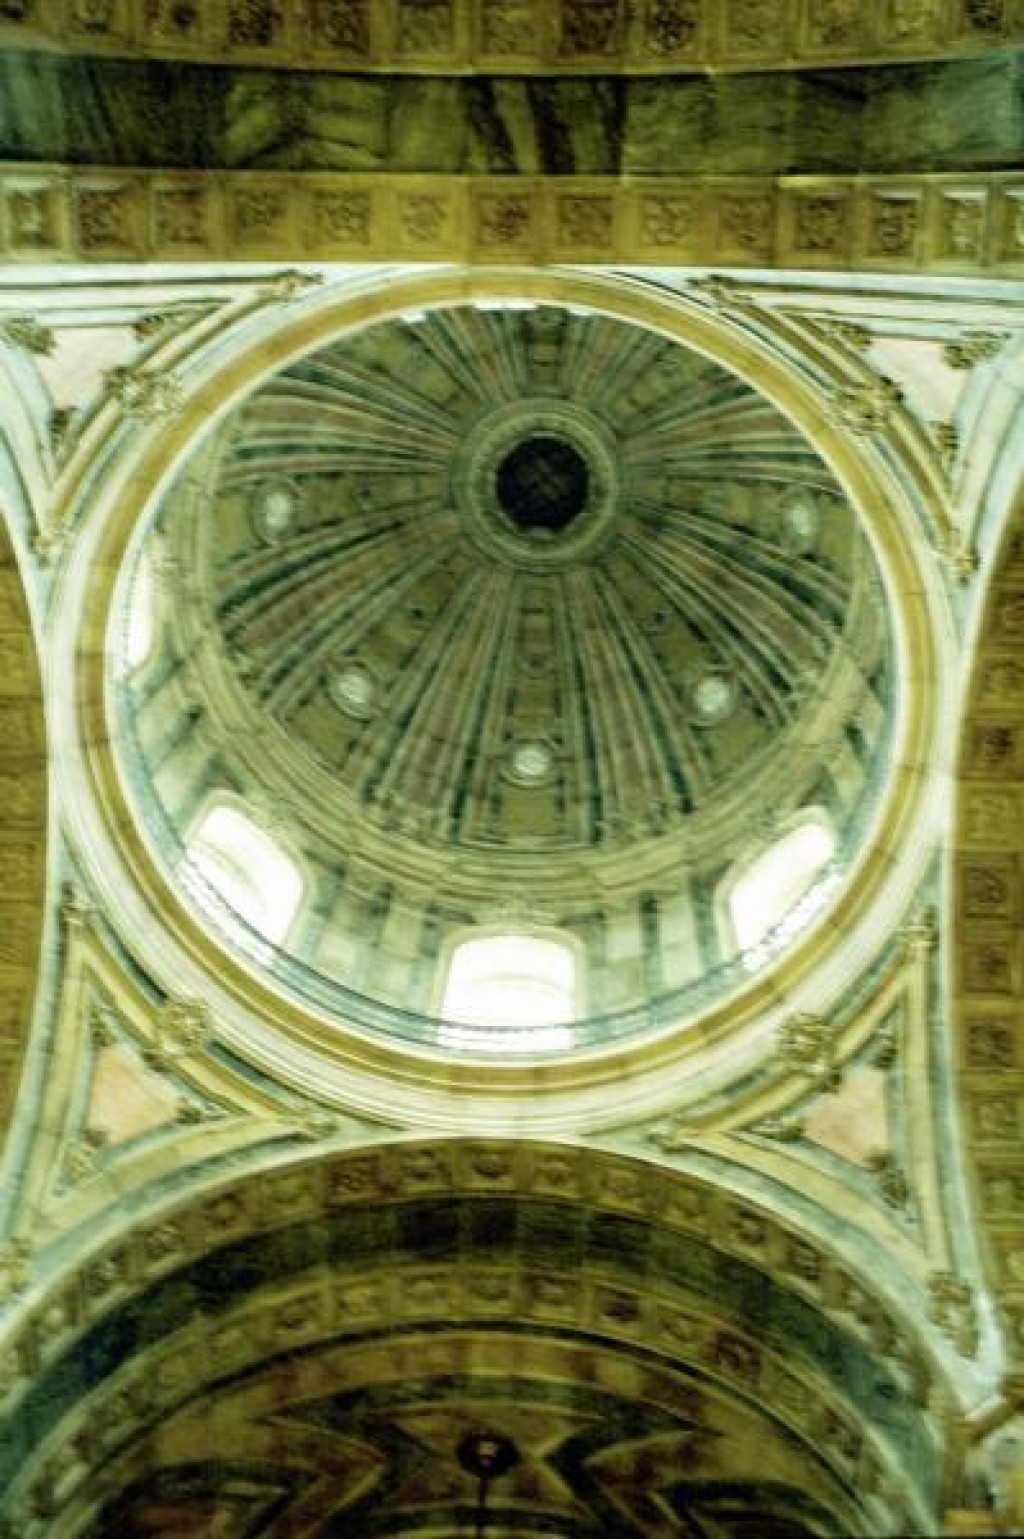 The dome of the church.